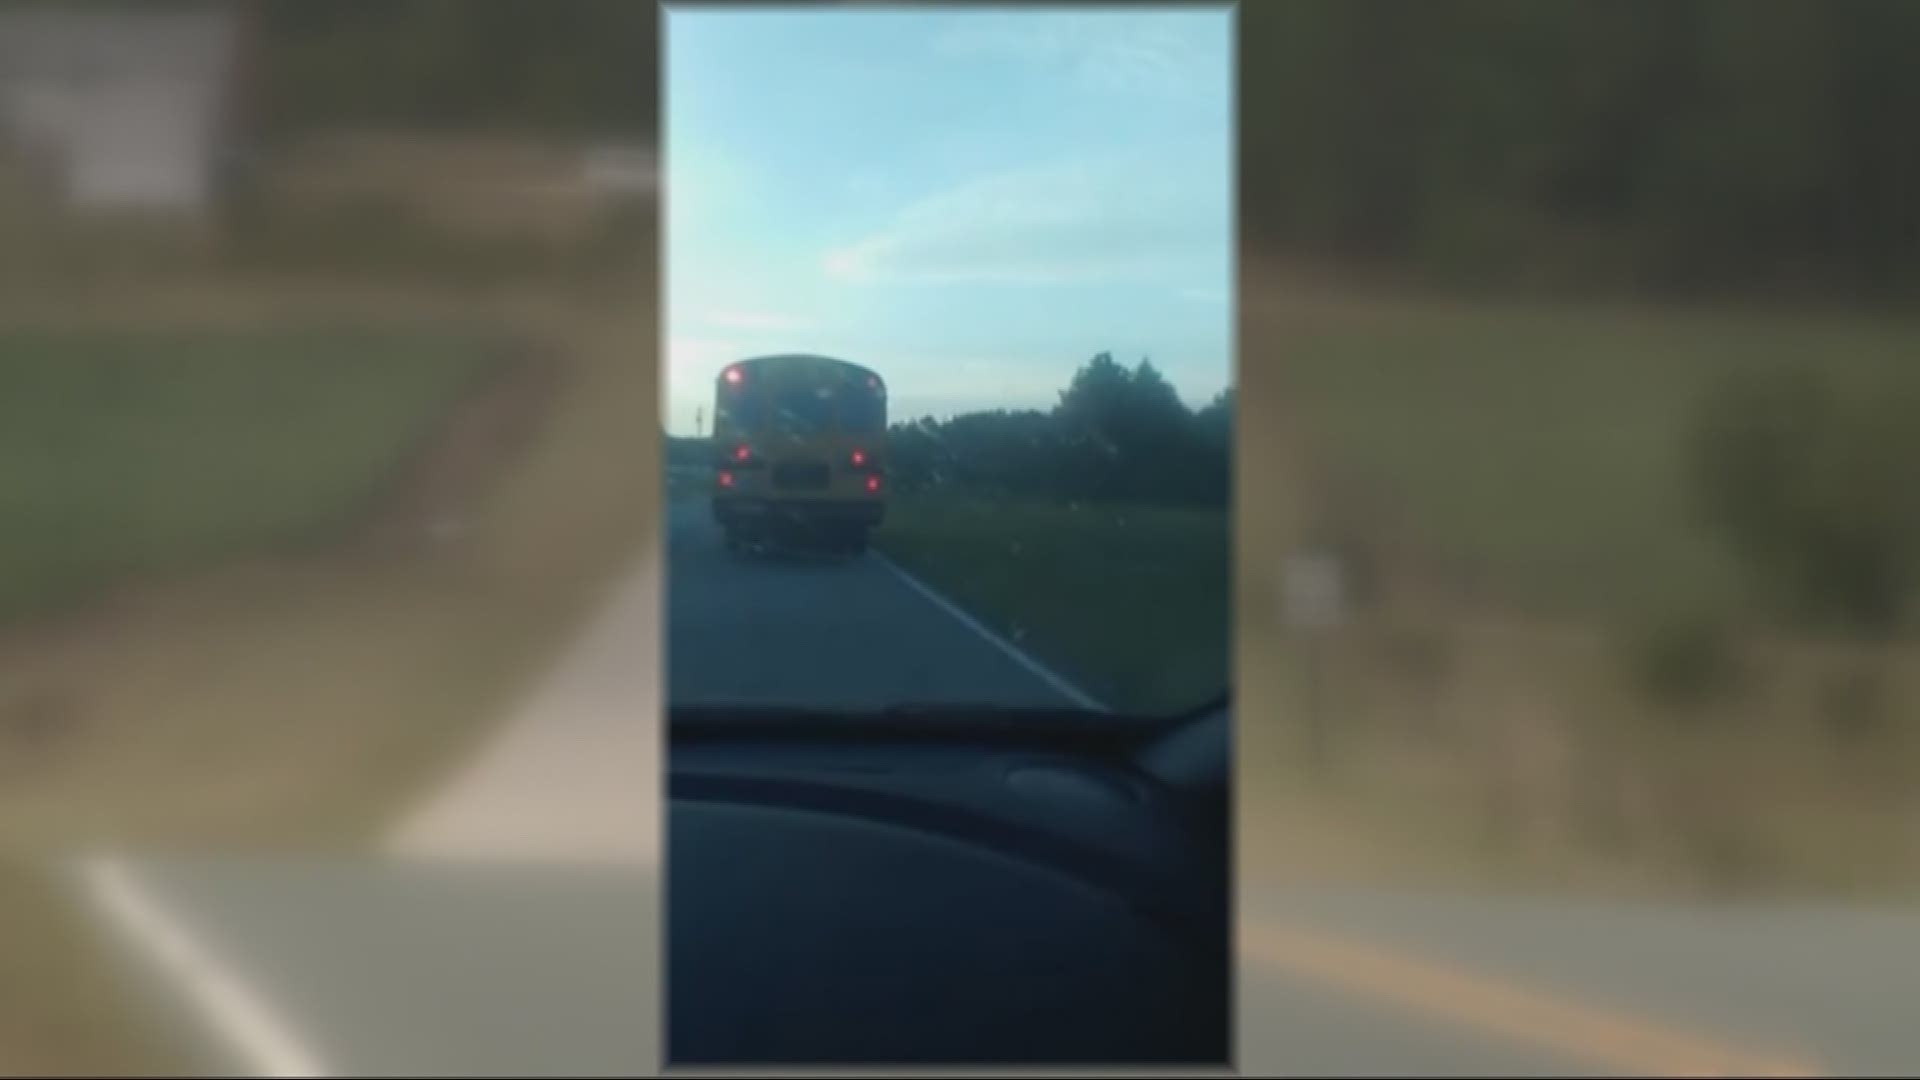 The SC bus driver has been arrested and charged